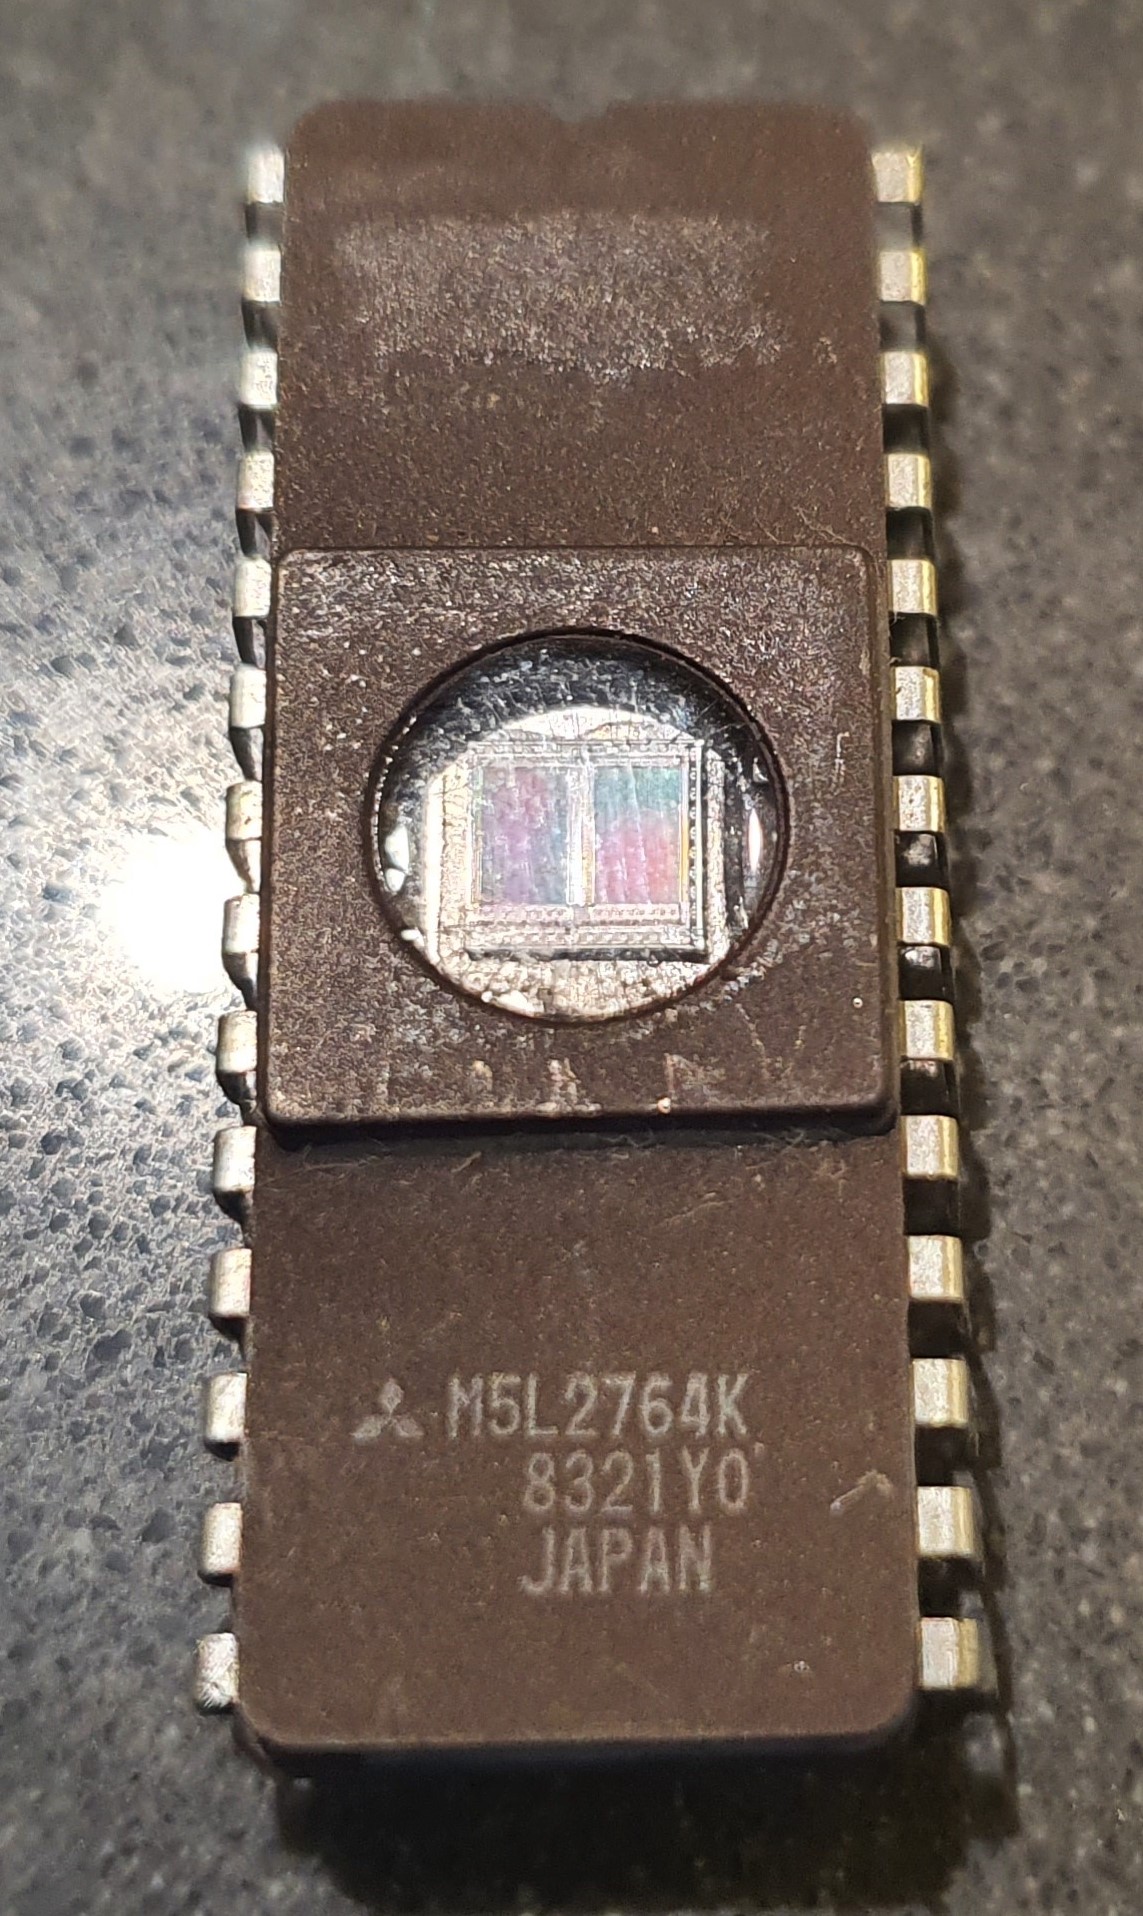 Picture of M5L2726K EPROM